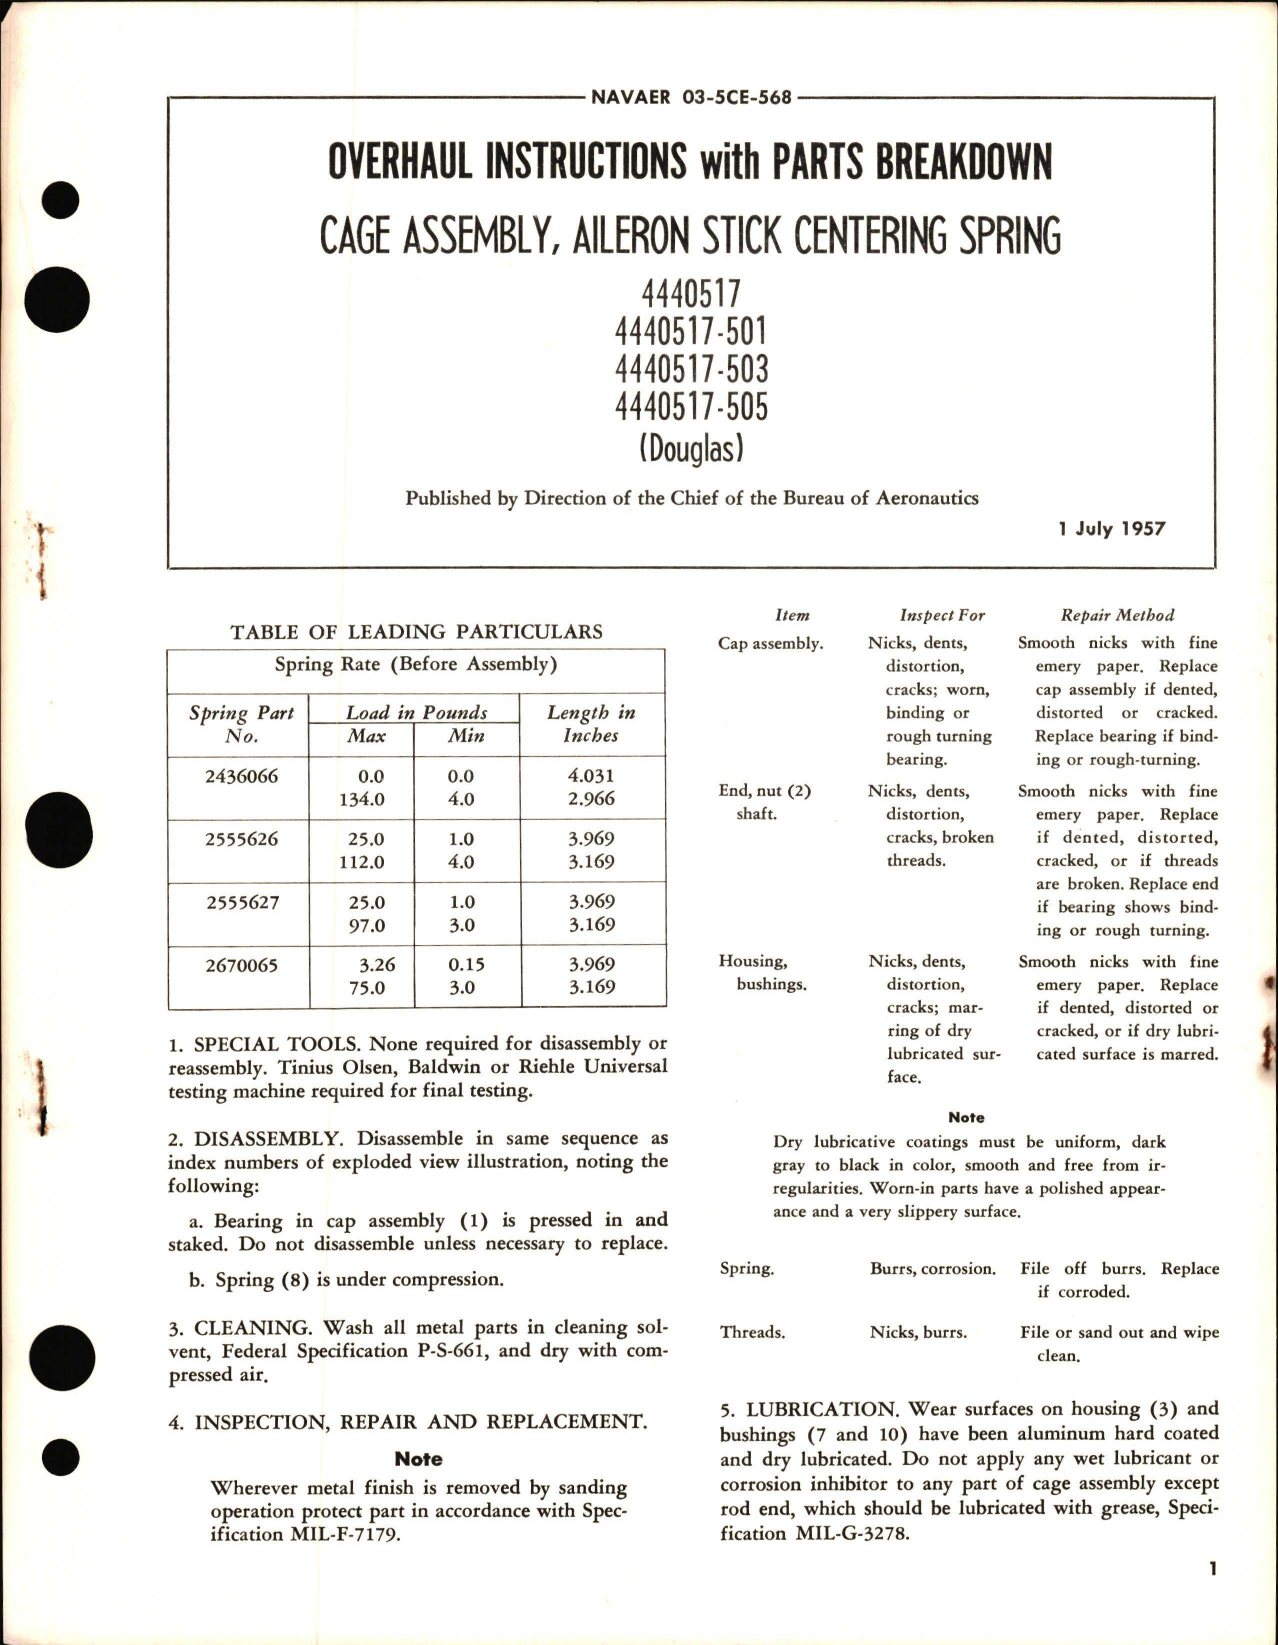 Sample page 1 from AirCorps Library document: Overhaul Instructions with Parts Breakdown for Cage Assembly, Aileron Stick Centering Spring 